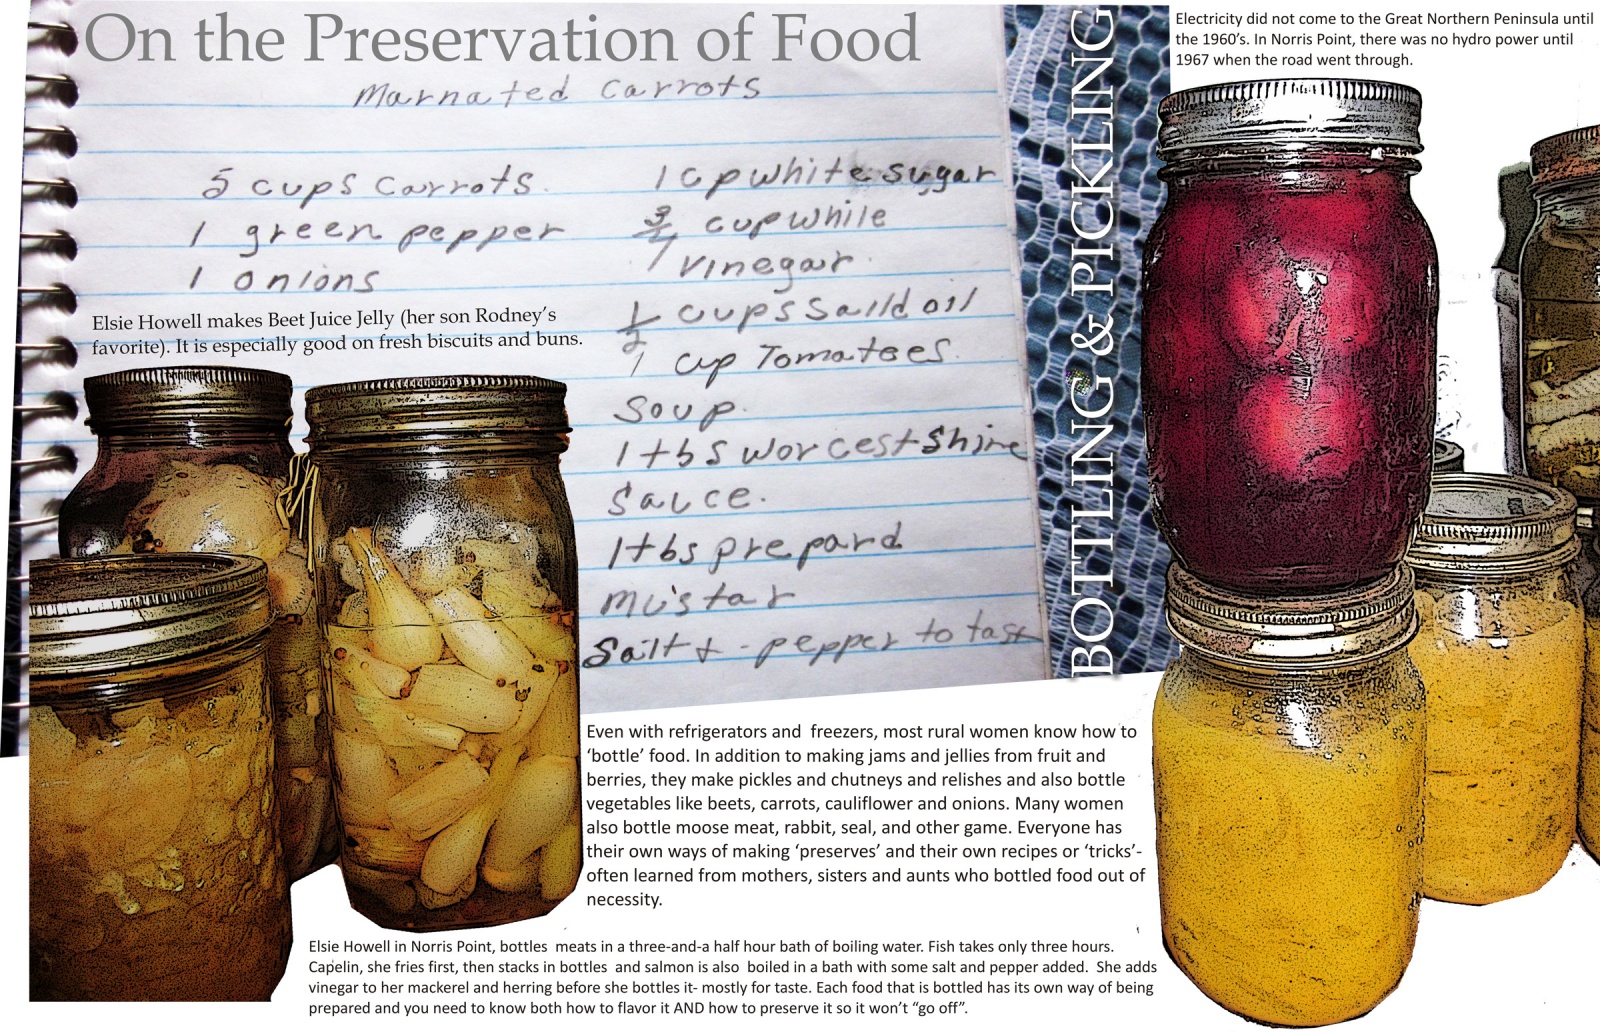 On the Preservation of Food